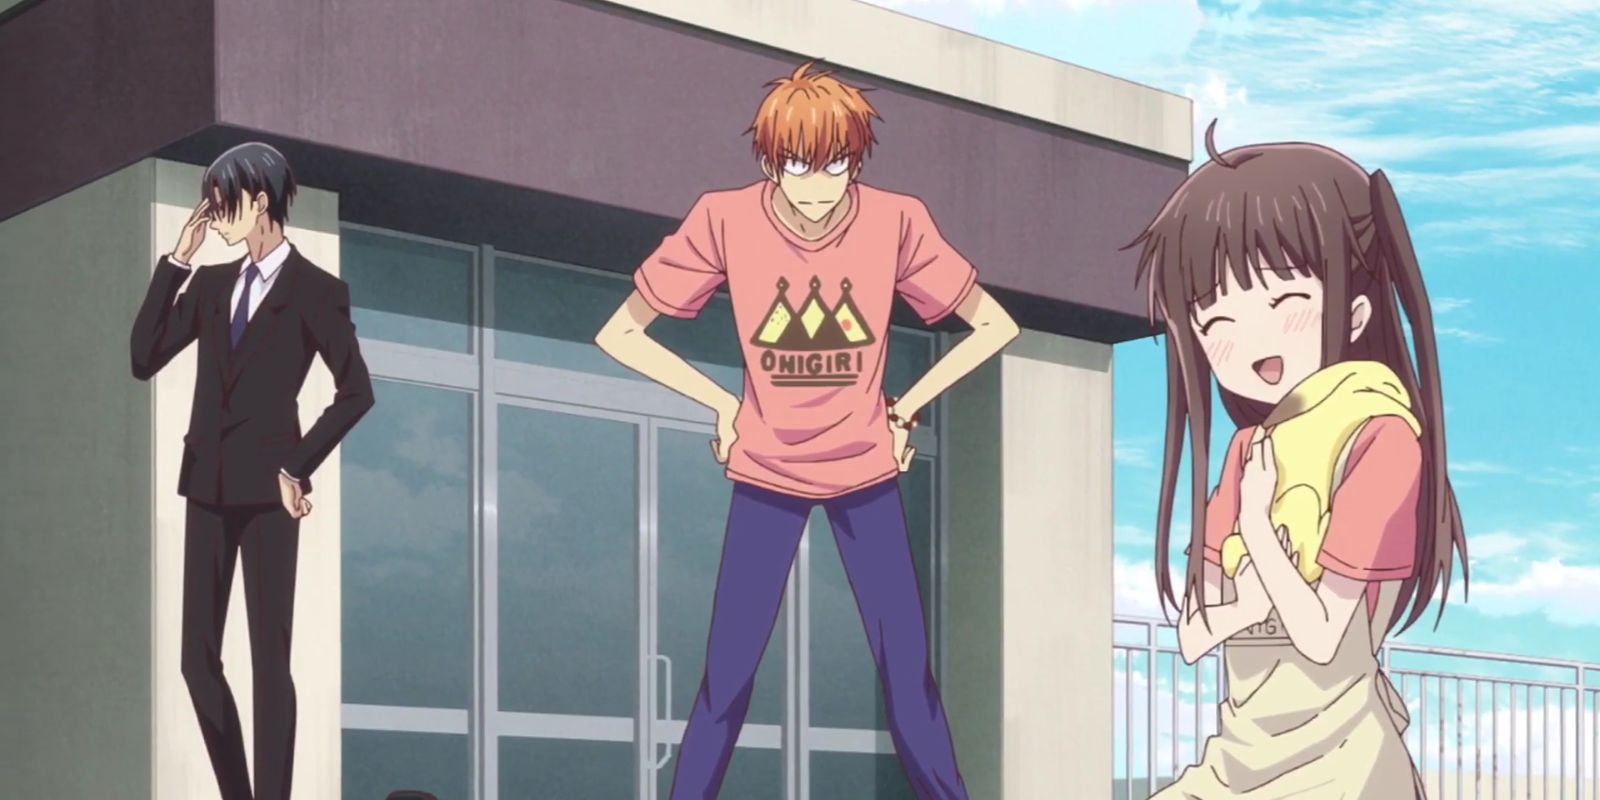 fruits basket tohru honda doesn't stand up for herself